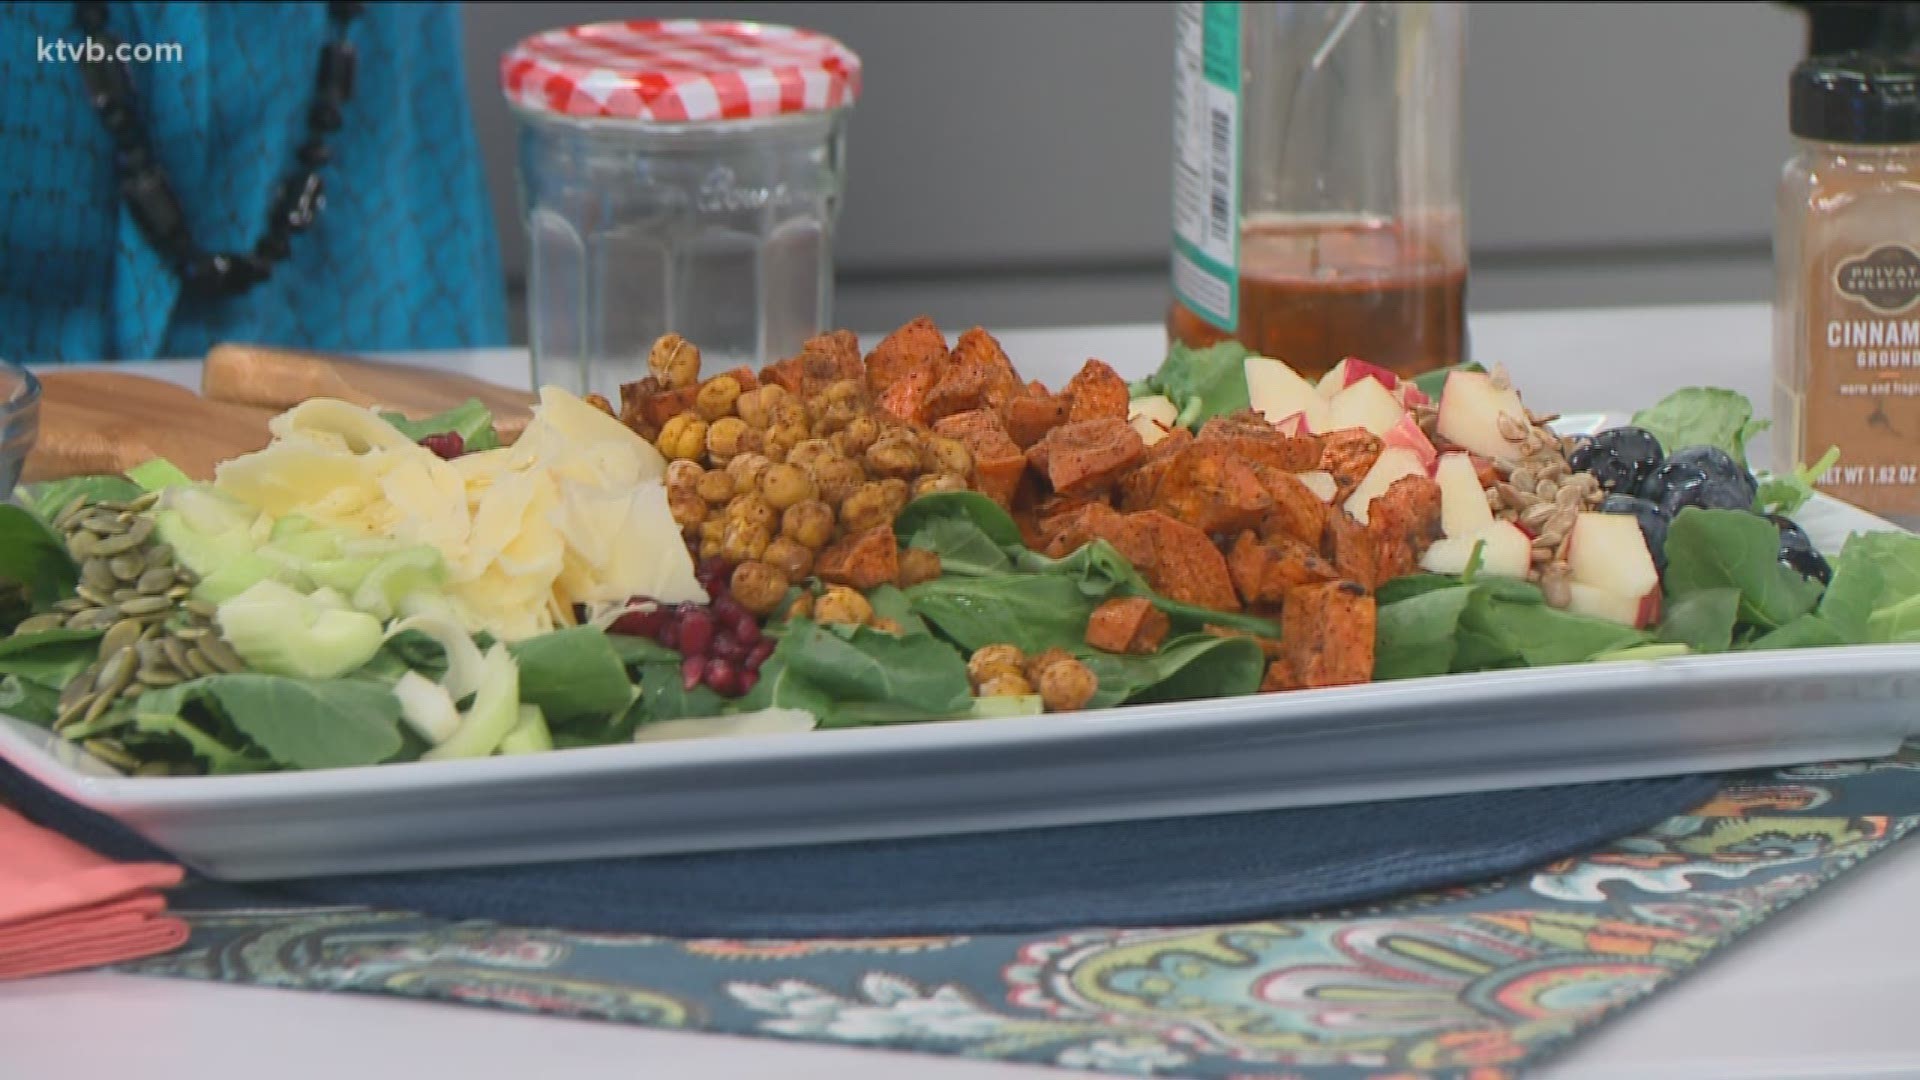 Registered dietitian Karen Mangum shows us how to make this healthy holiday recipe.